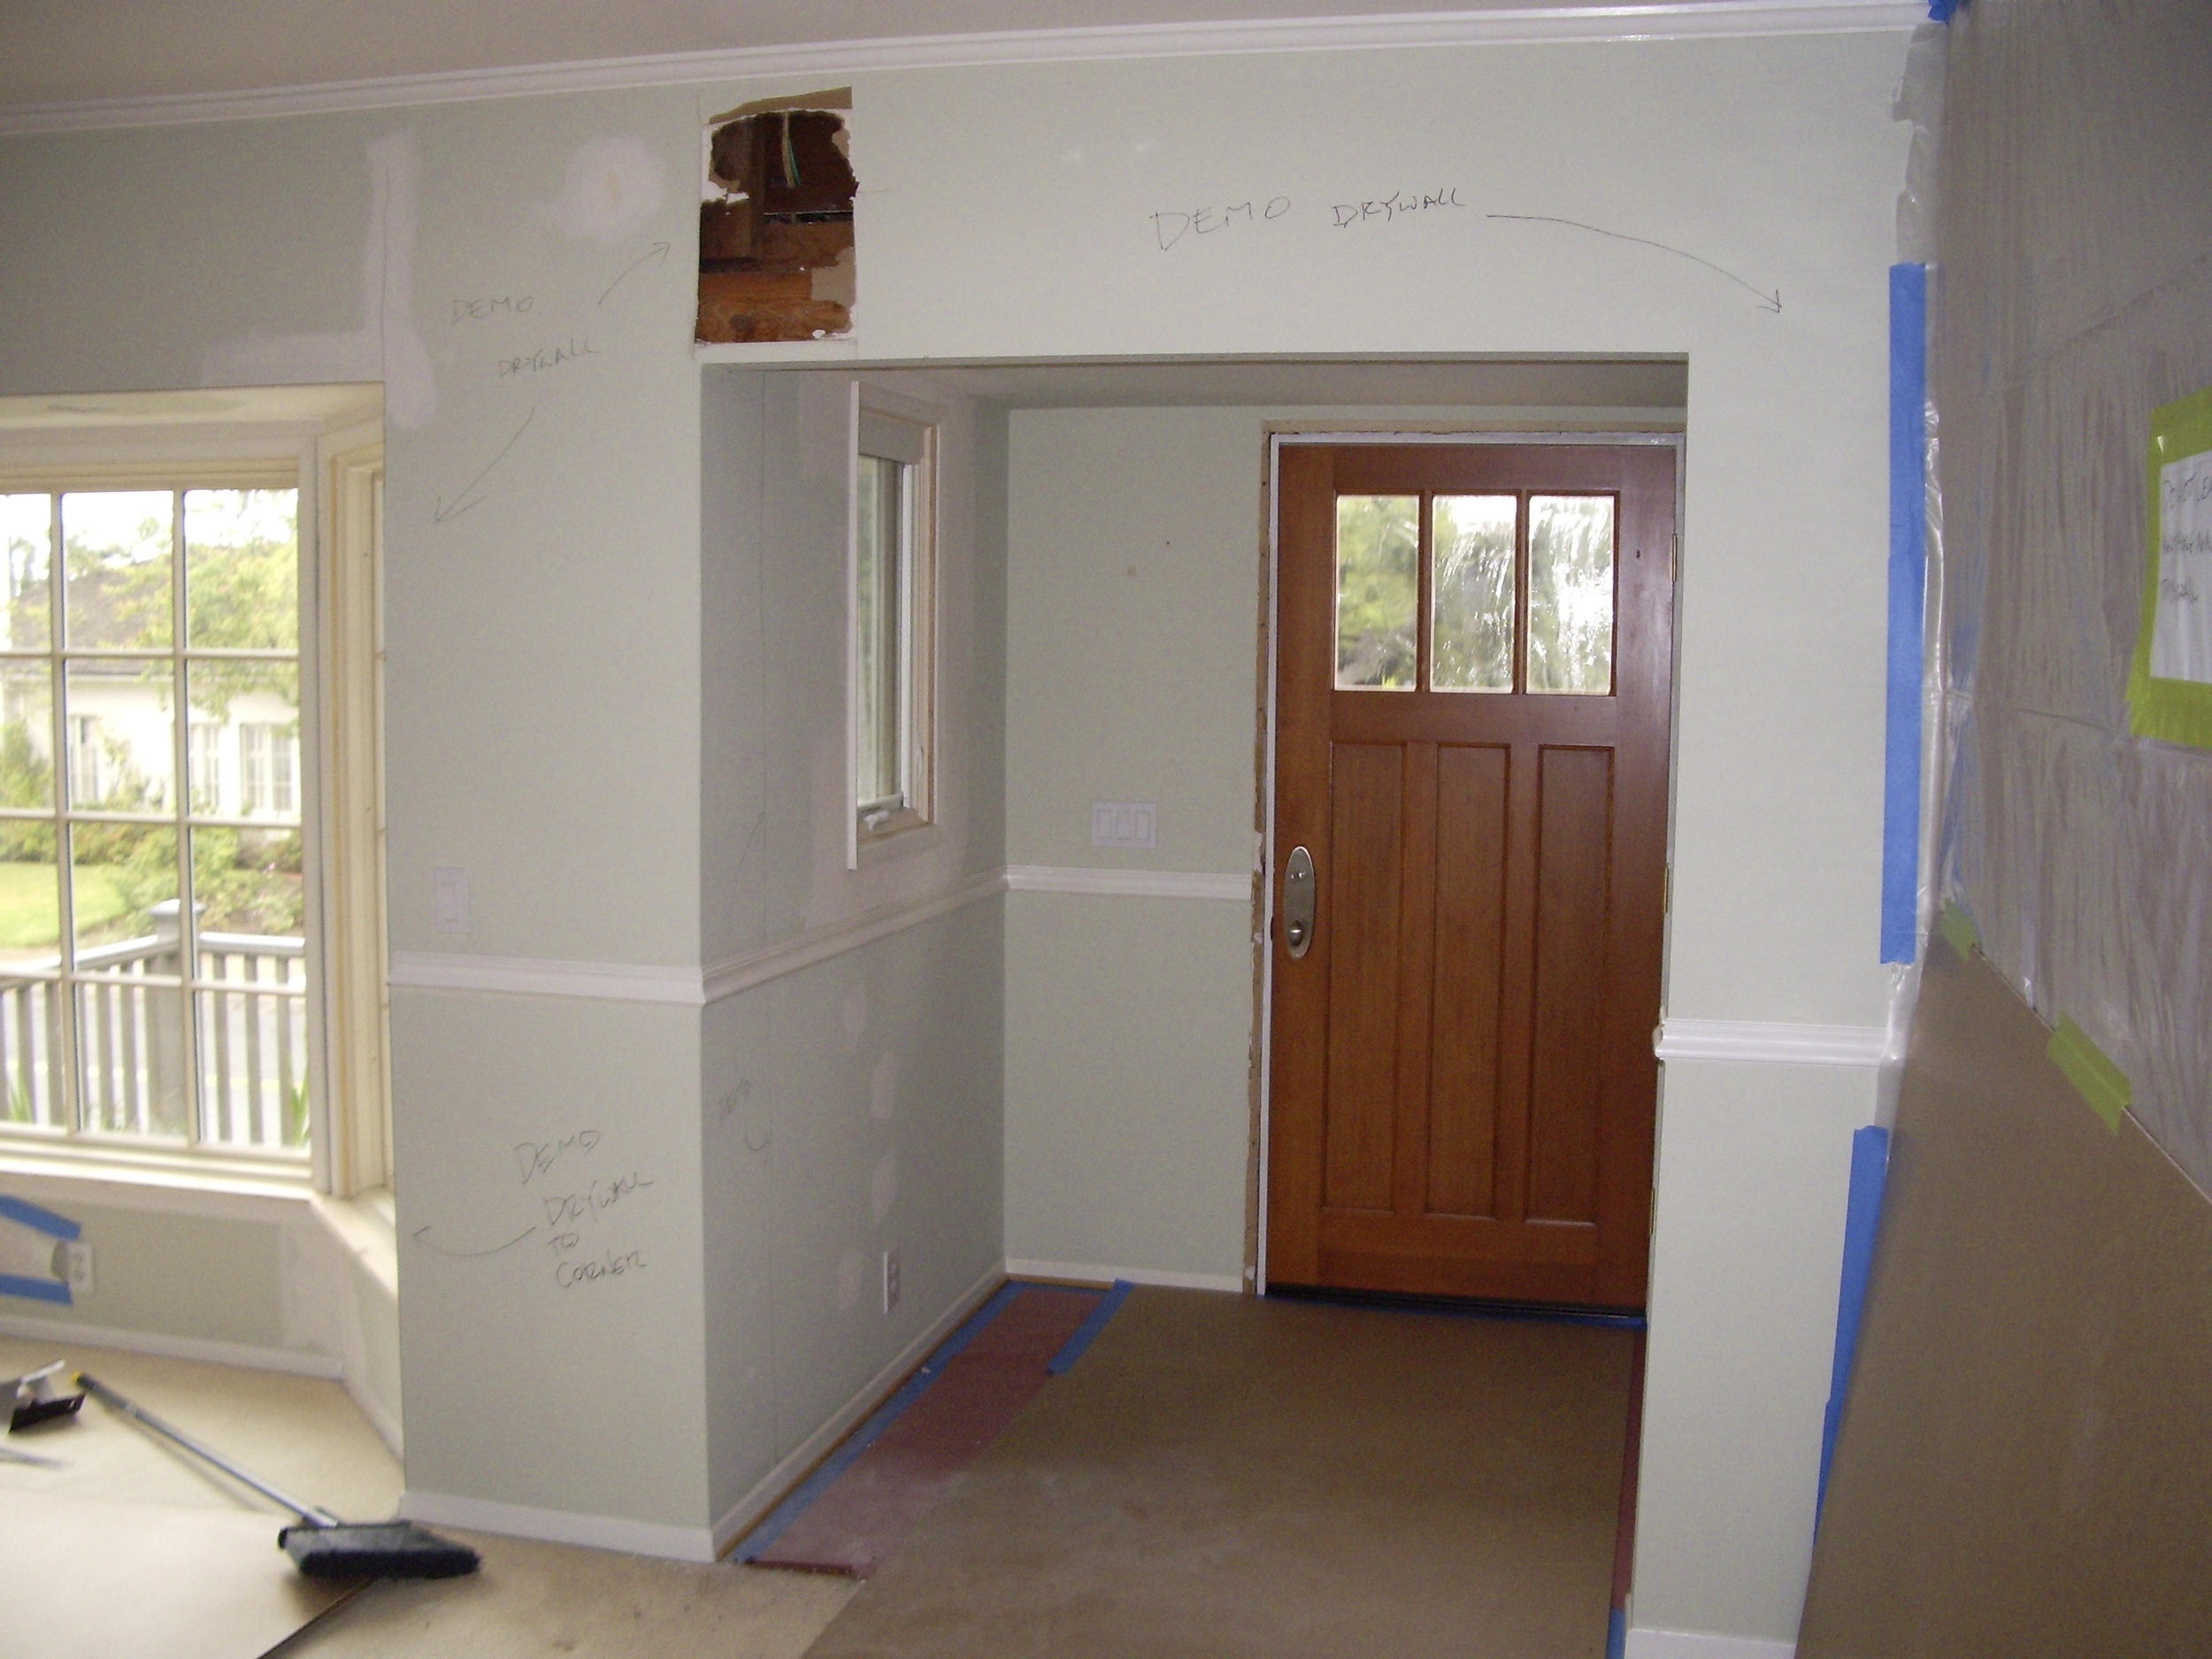  Before: Unwelcoming foyer with low ceiling. 